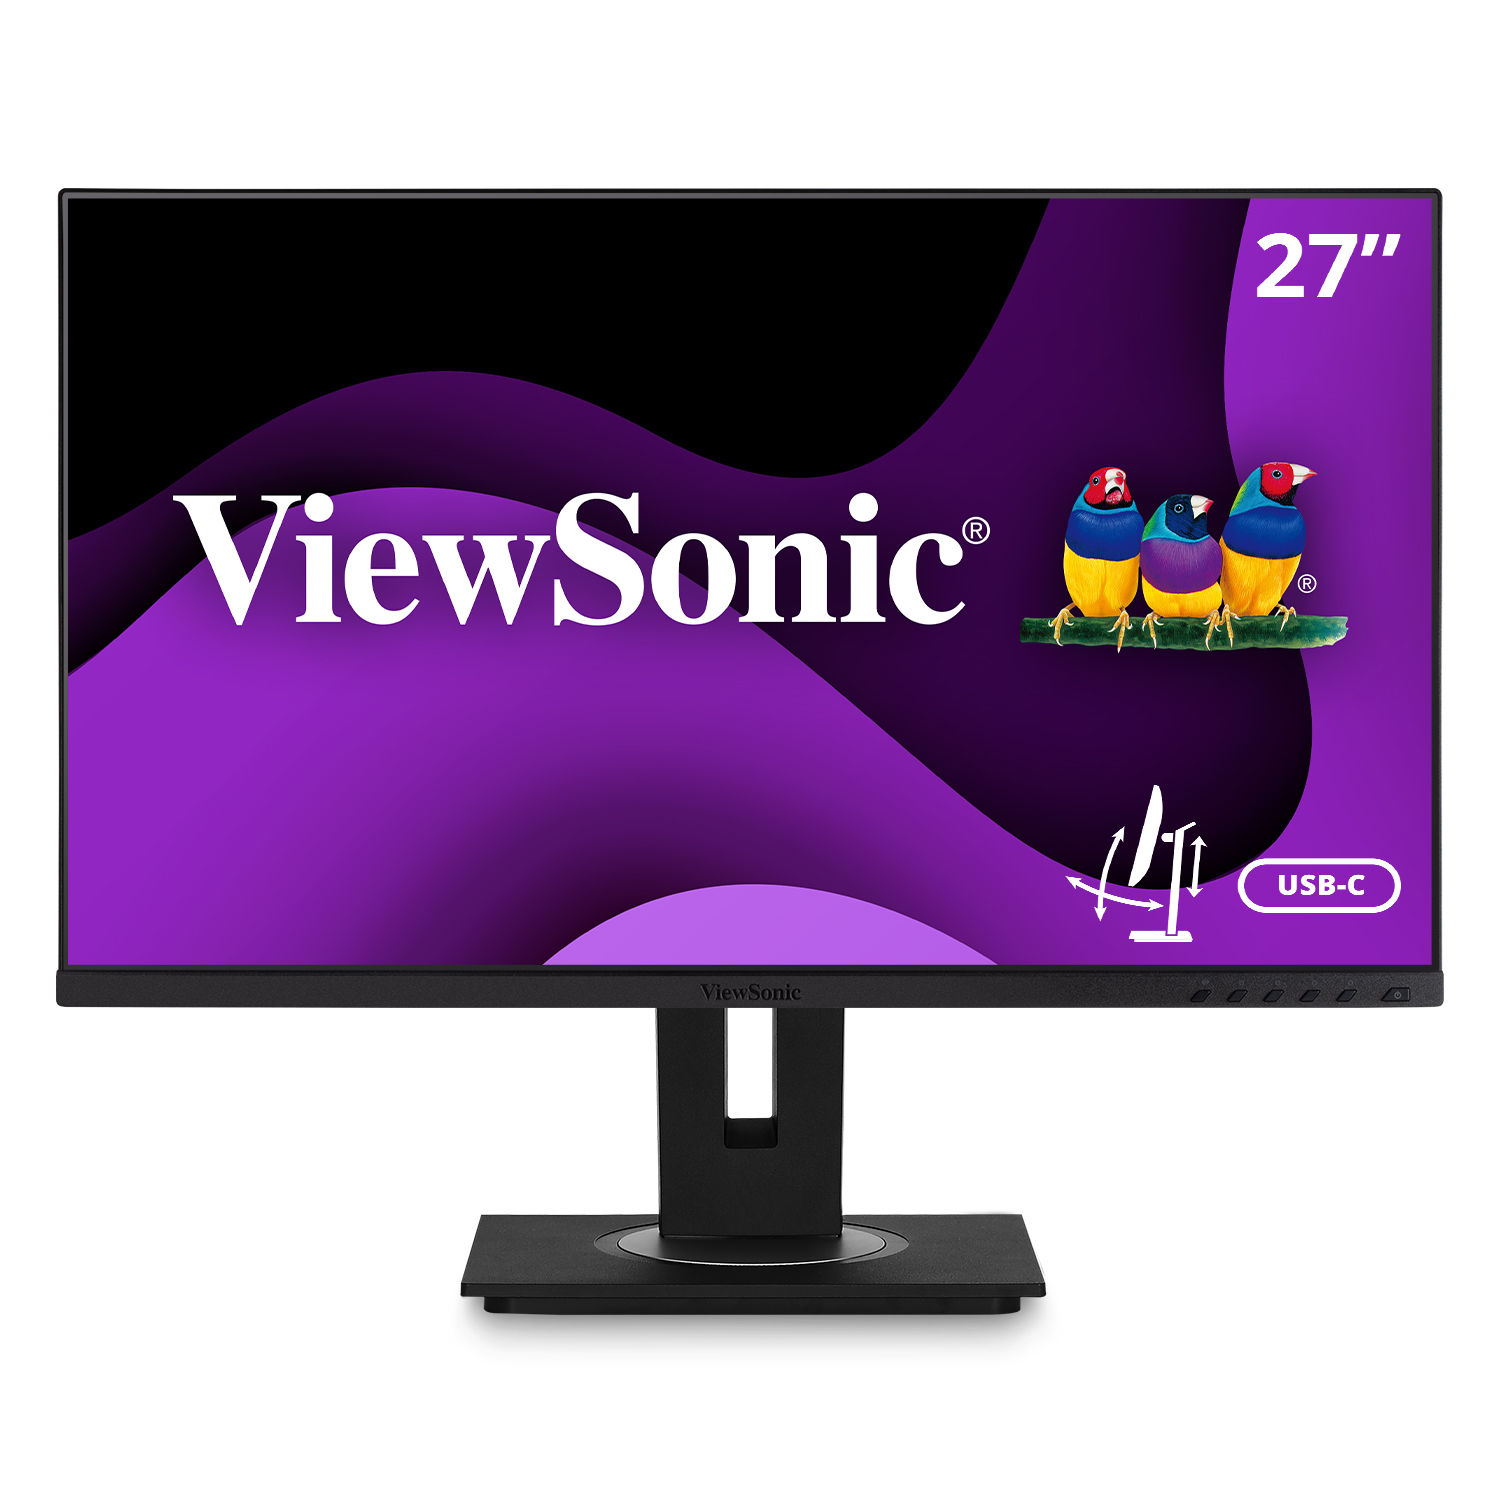 ViewSonic VG2755 27 Inch IPS 1080p Monitor with USB C 3.1, HDMI, DisplayPort, VGA and 40 Degree Tilt Ergonomics for Home and Office - image 1 of 10